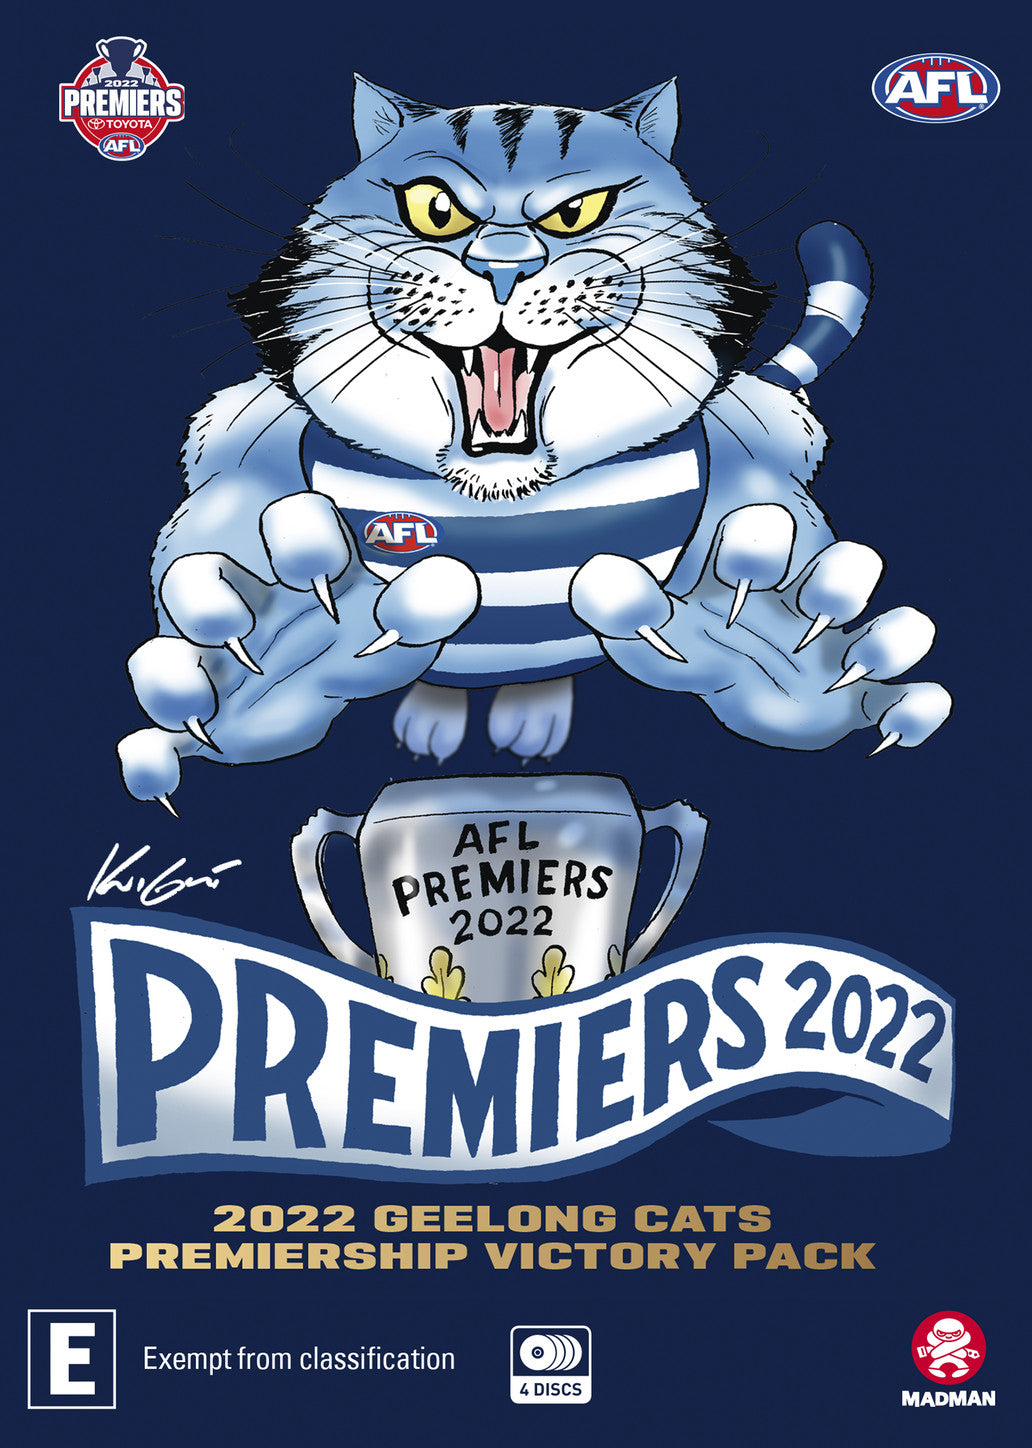 2022 AFL PREMIERS GEELONG CATS VICTORY PACK